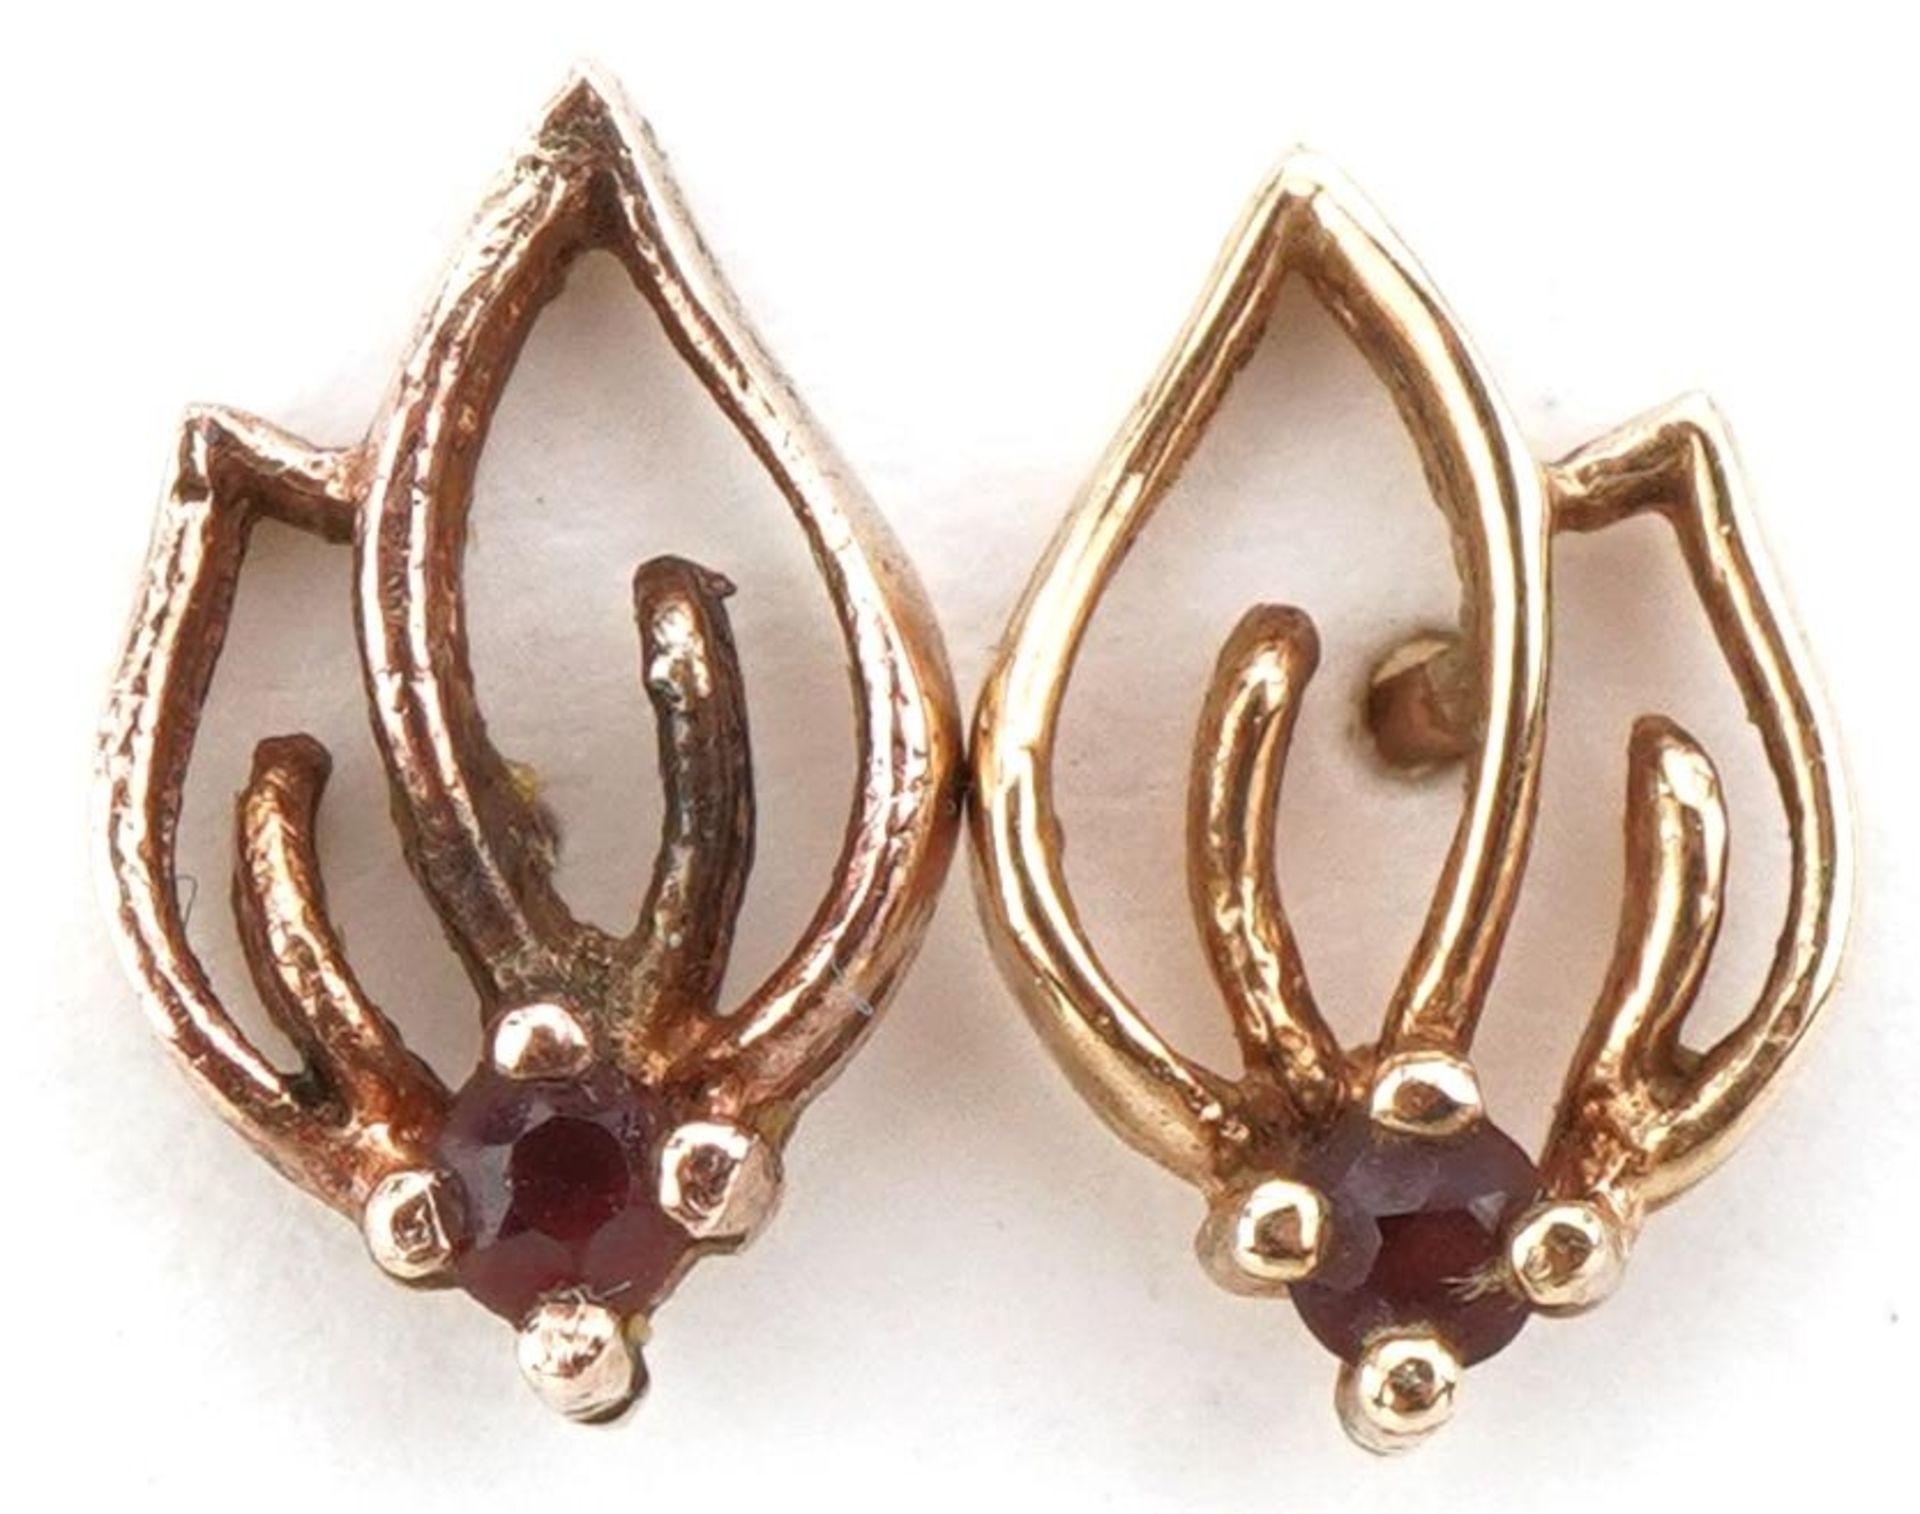 Pair of 9ct gold garnet floral stud earrings, 10mm high, 0.8g : For further information on this